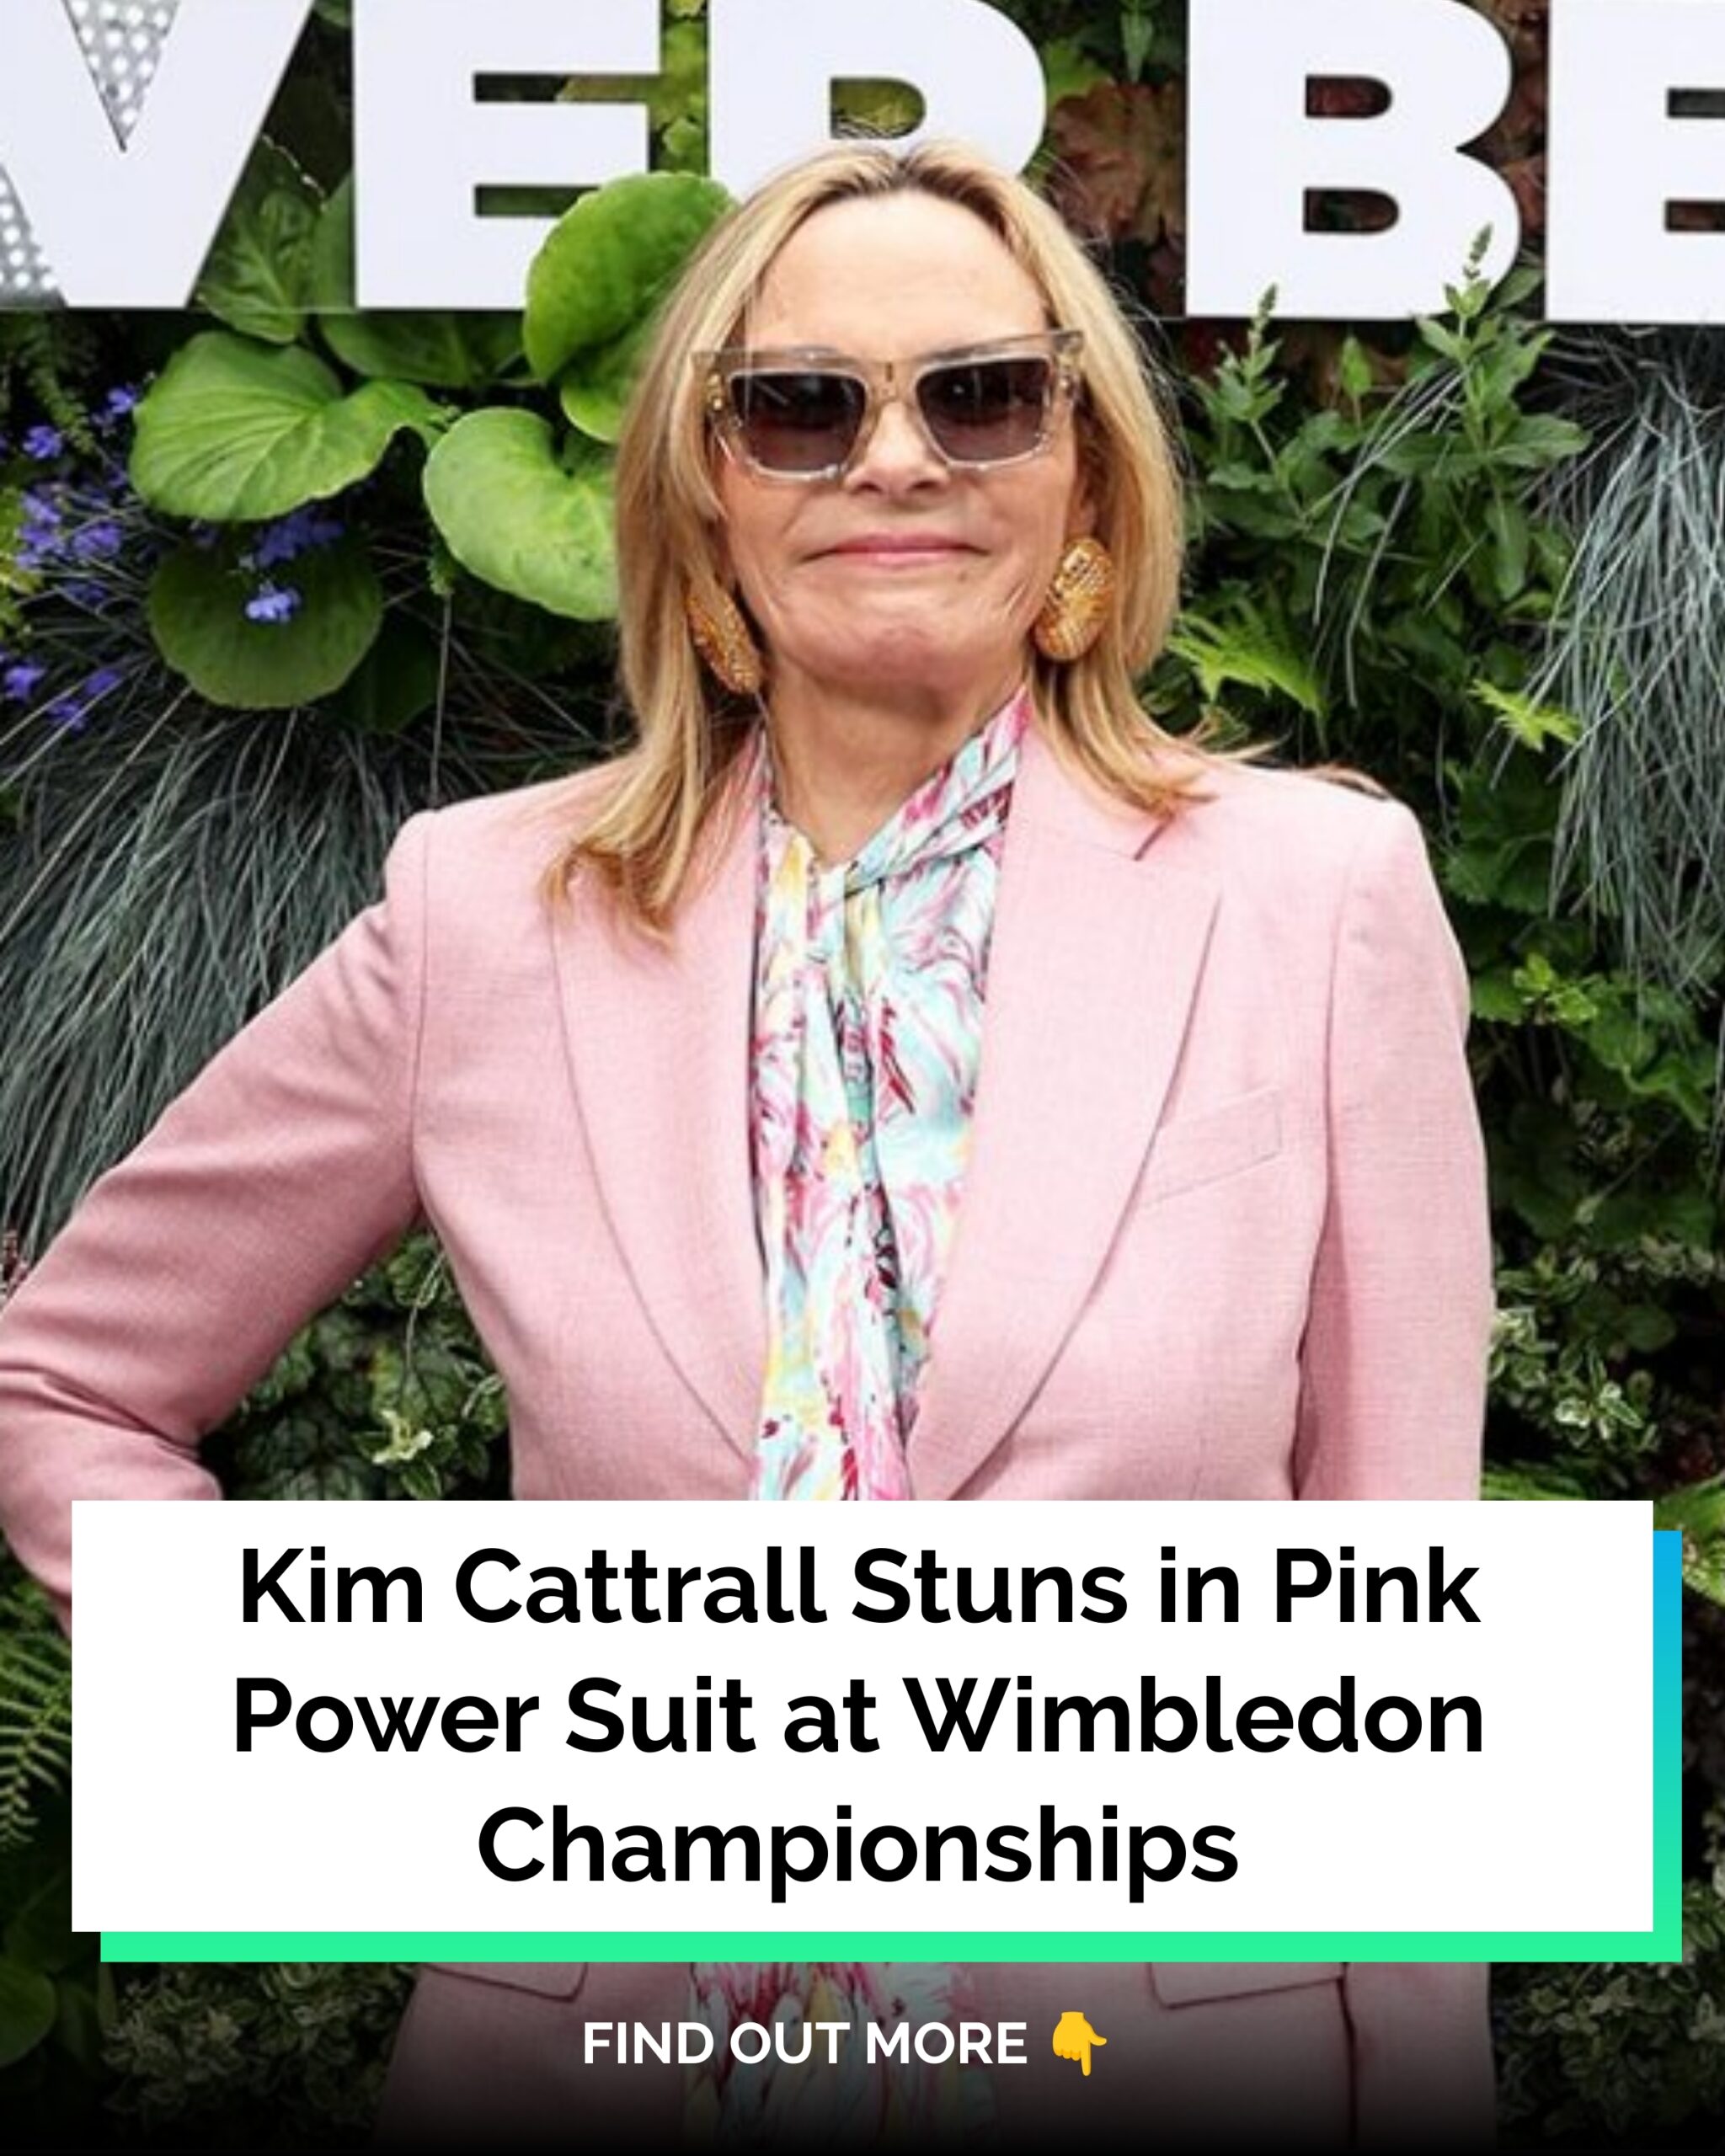 Kim Cattrall Stuns in Pink Power Suit at Wimbledon Championships